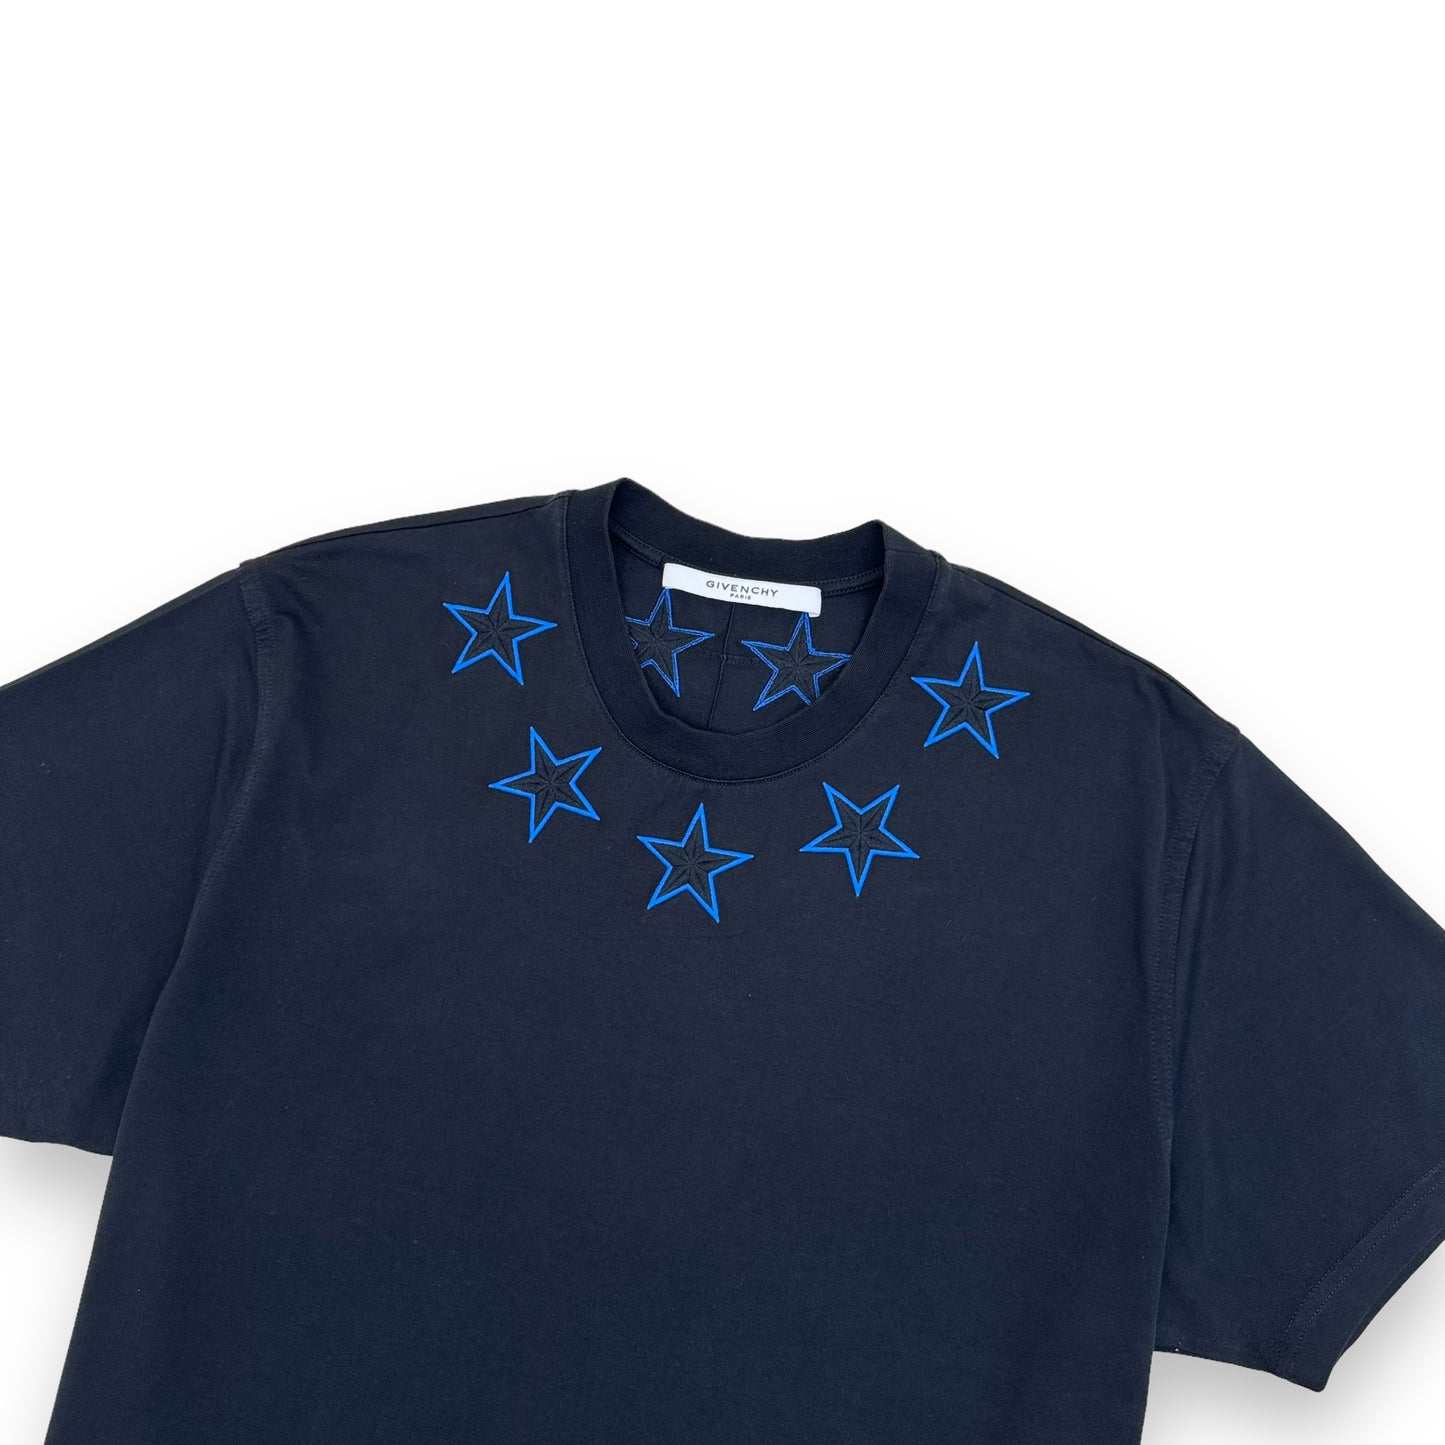 GIVENCHY OVERSIZED STAR EMBROIDERED T-SHIRT BLACK / BLUE XS